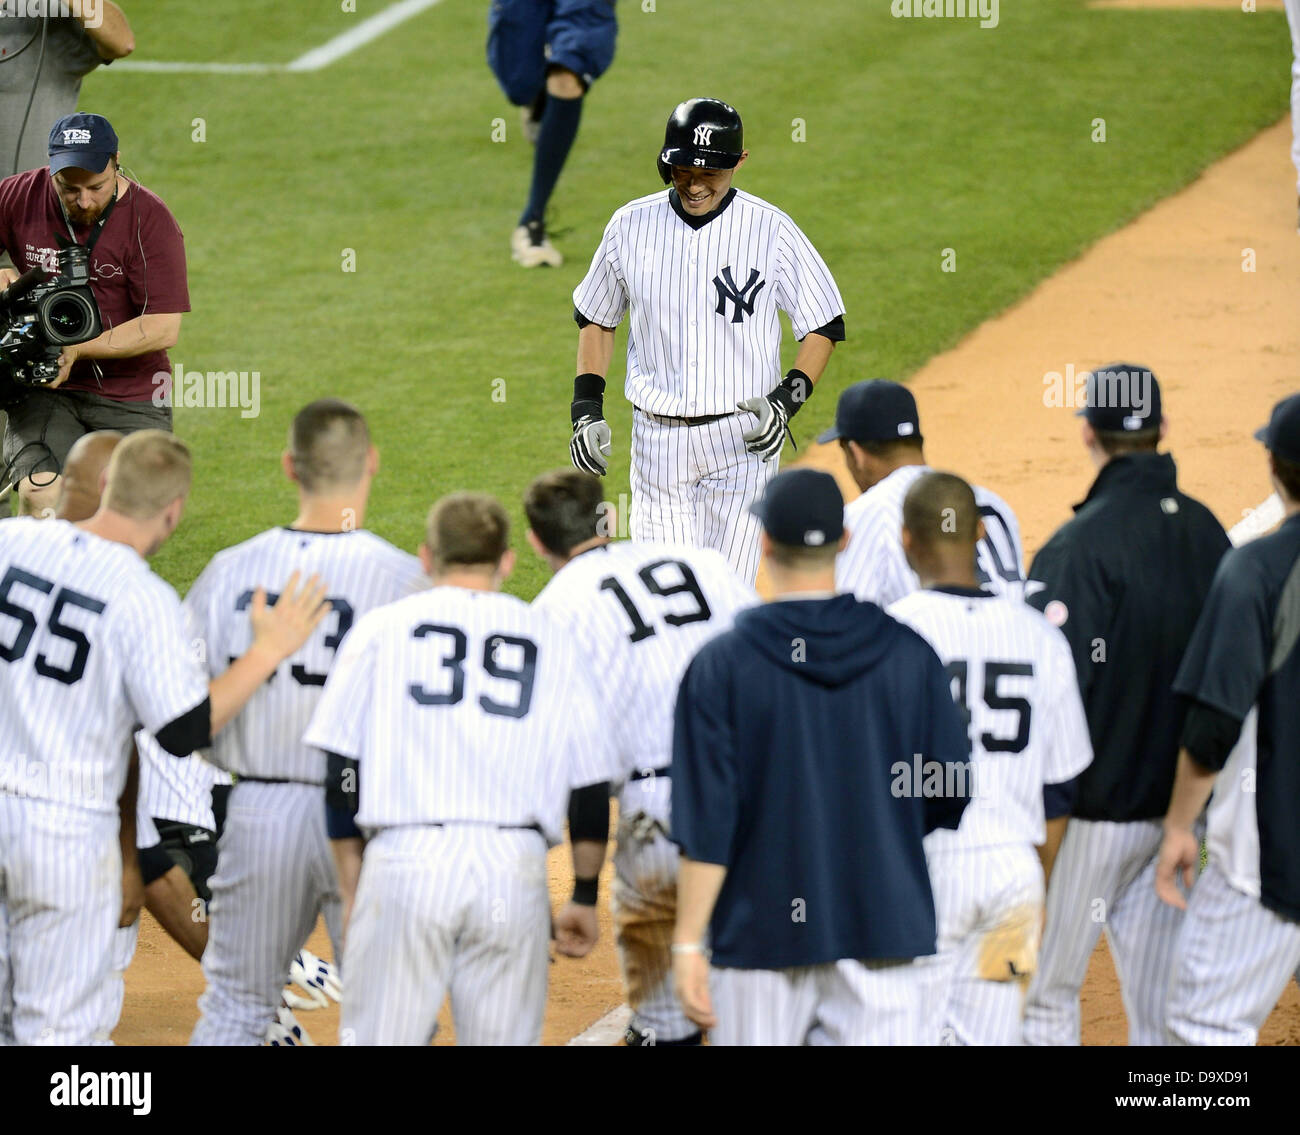 Ichiro Suzuki (Yankees), JUNE 25, 2013 - MLB : Ichiro Suzuki of the New York Yankees is greeted by his teammates at home plate after hitting a walk off home run in the ninth inning during the Major League Baseball game against the Texas Rangers at Yankee Stadium in The Bronx, New York, United States. (Photo by AFLO) Stock Photo